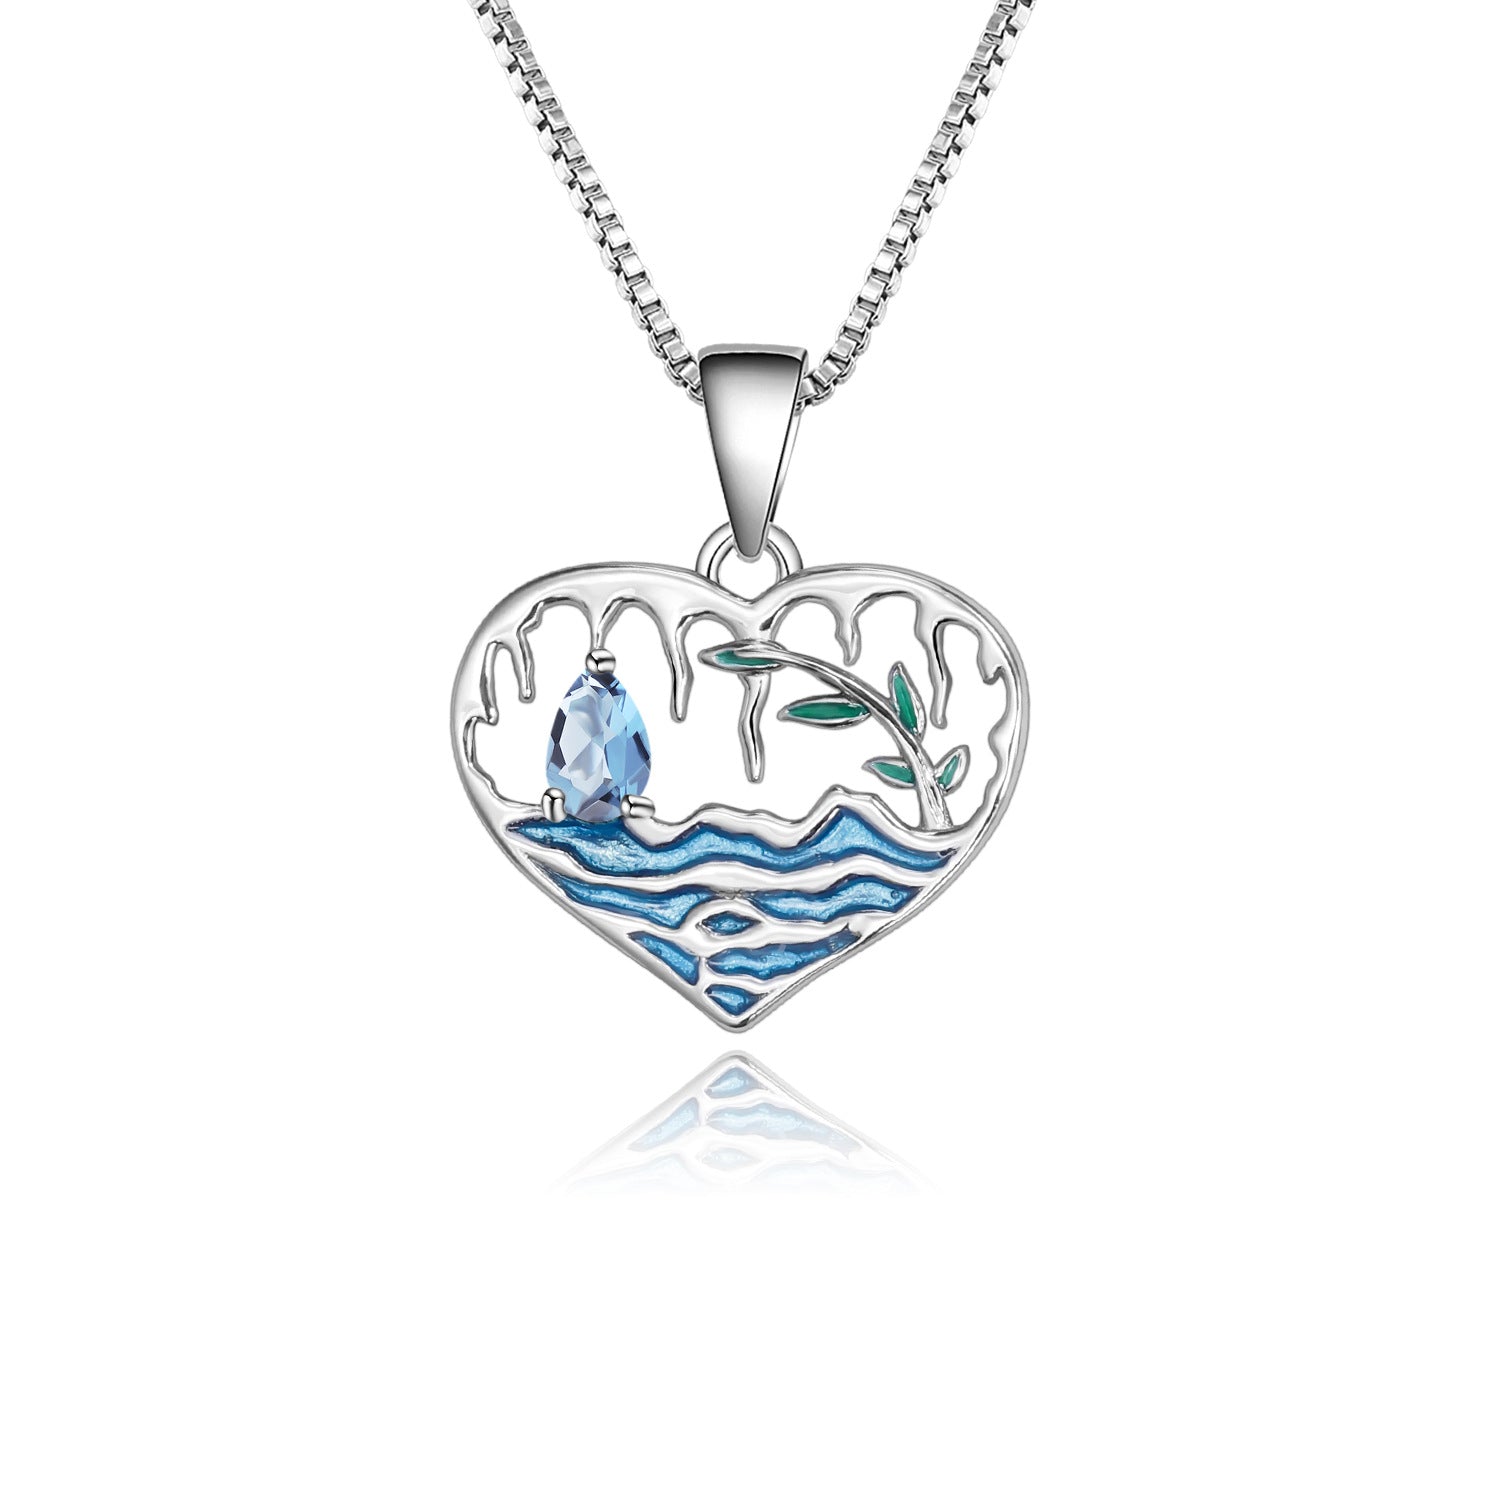 Natural Colourful Gemstone Enamel Lake In The Heart Pendant Silver Necklace for Women